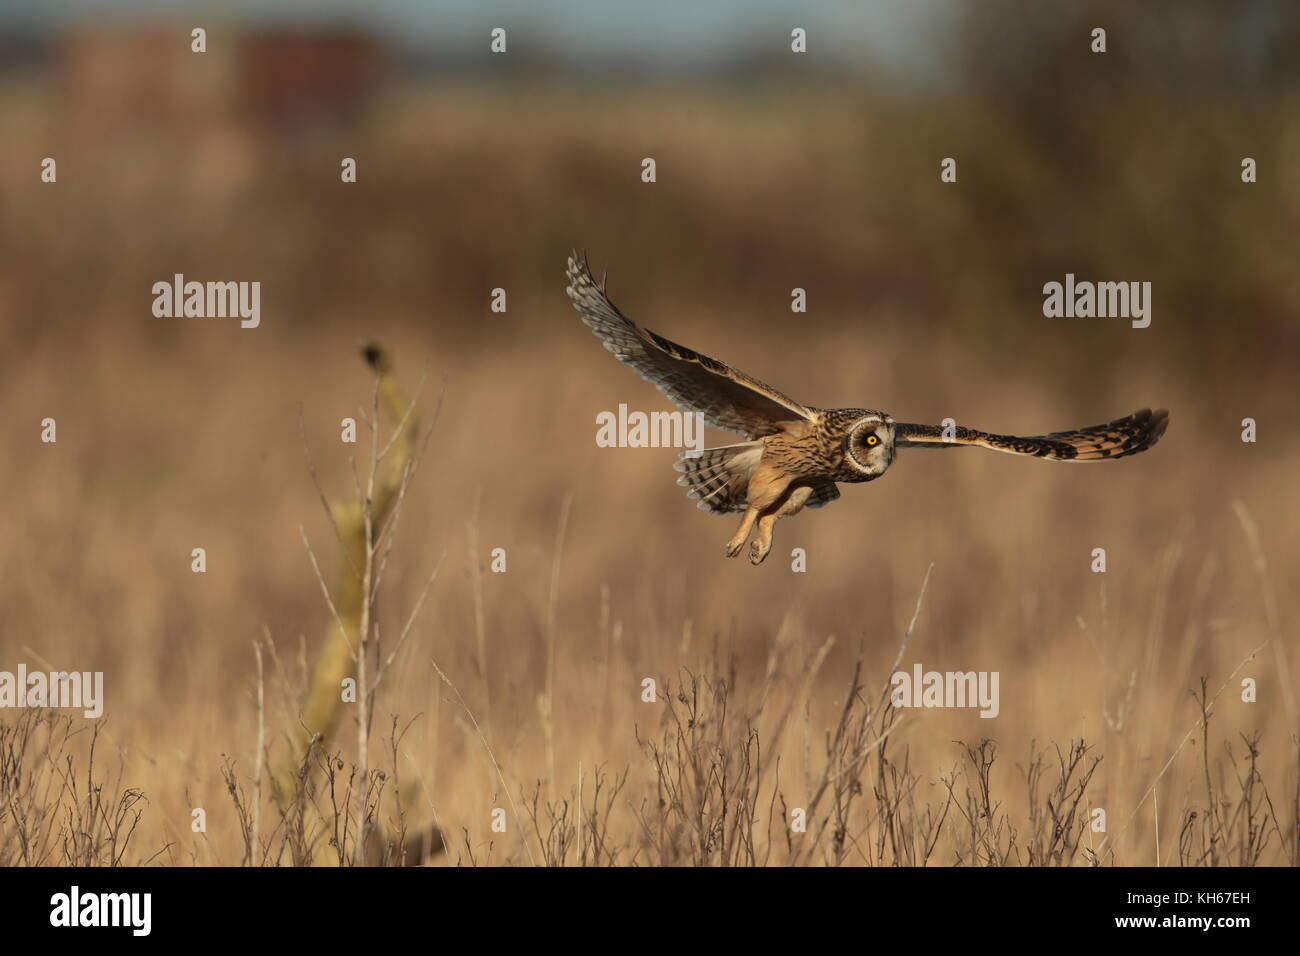 Hunting Short-eared Owl, three linked images of an Owl flying over a mossland meadow Stock Photo